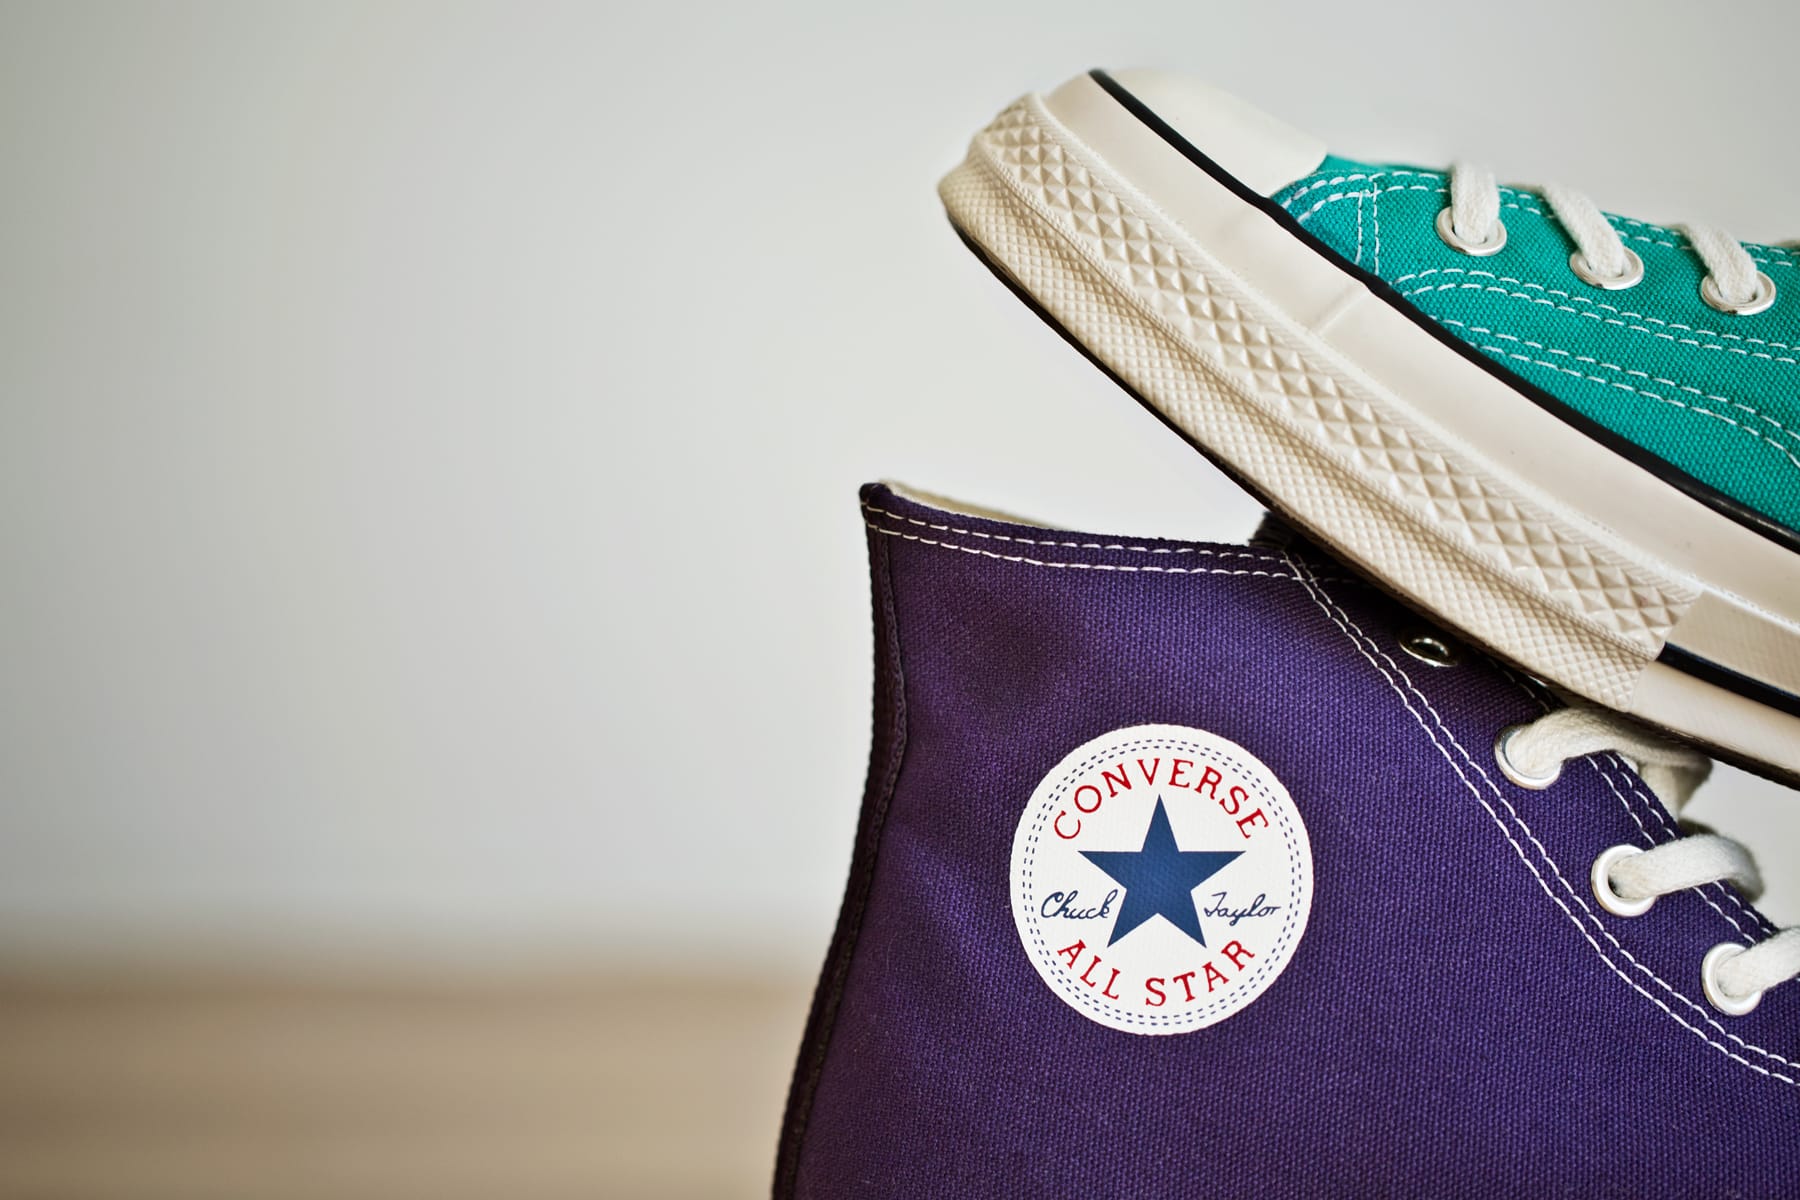 Converse 2014 First String 1970s Chuck Taylor All Star Collection |  HYPEBEAST